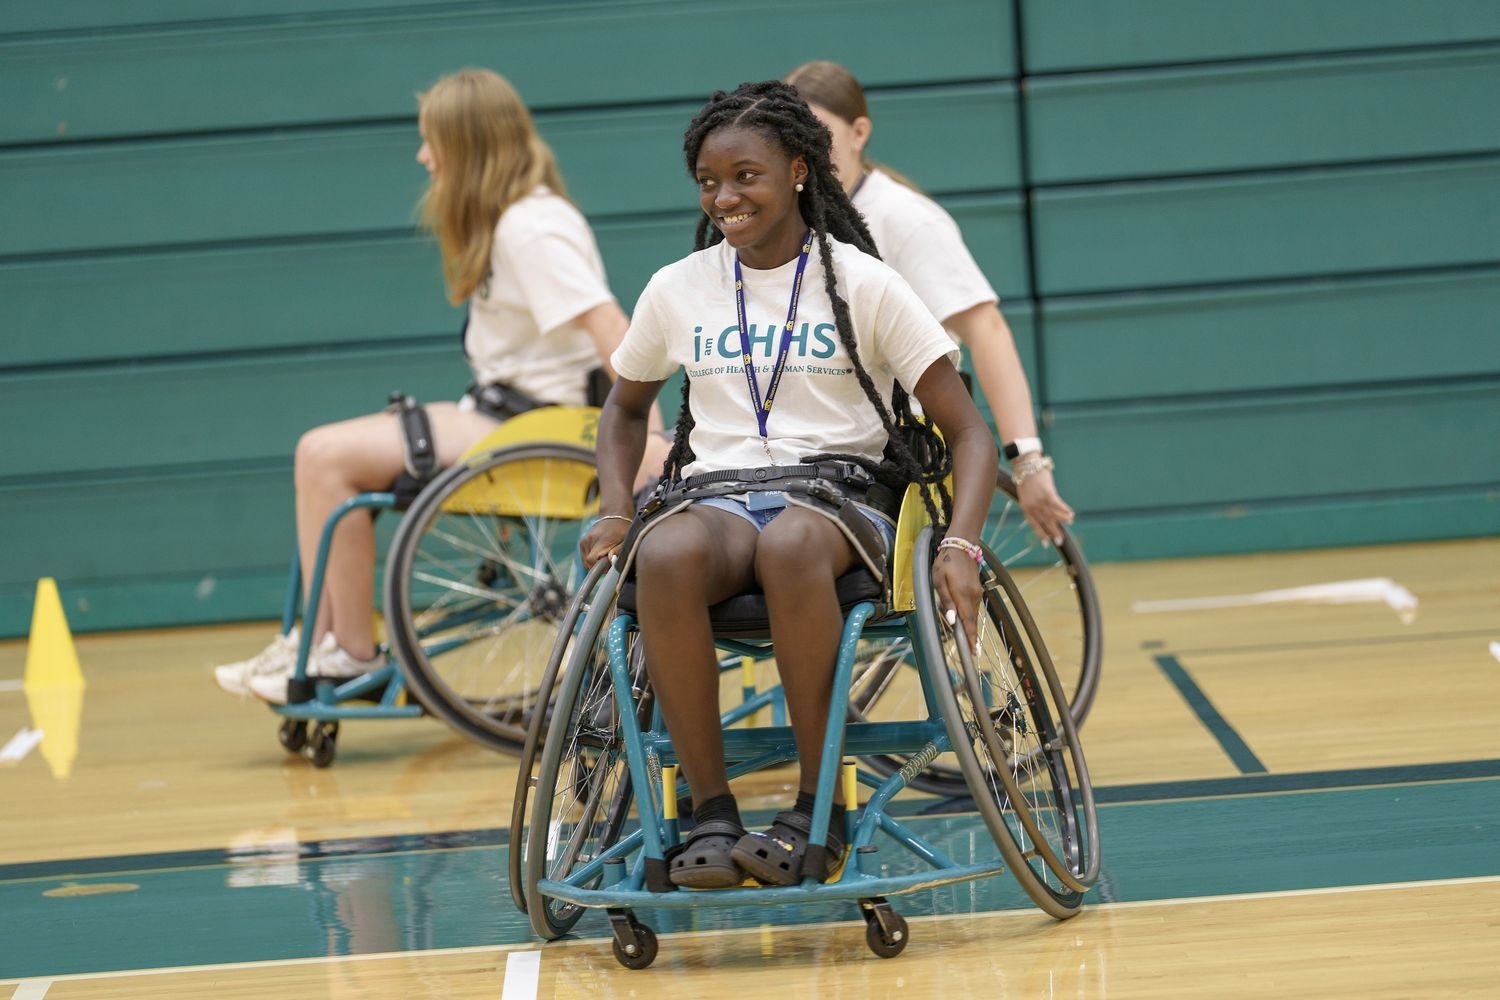 Students in wheelchairs in a gymnasium